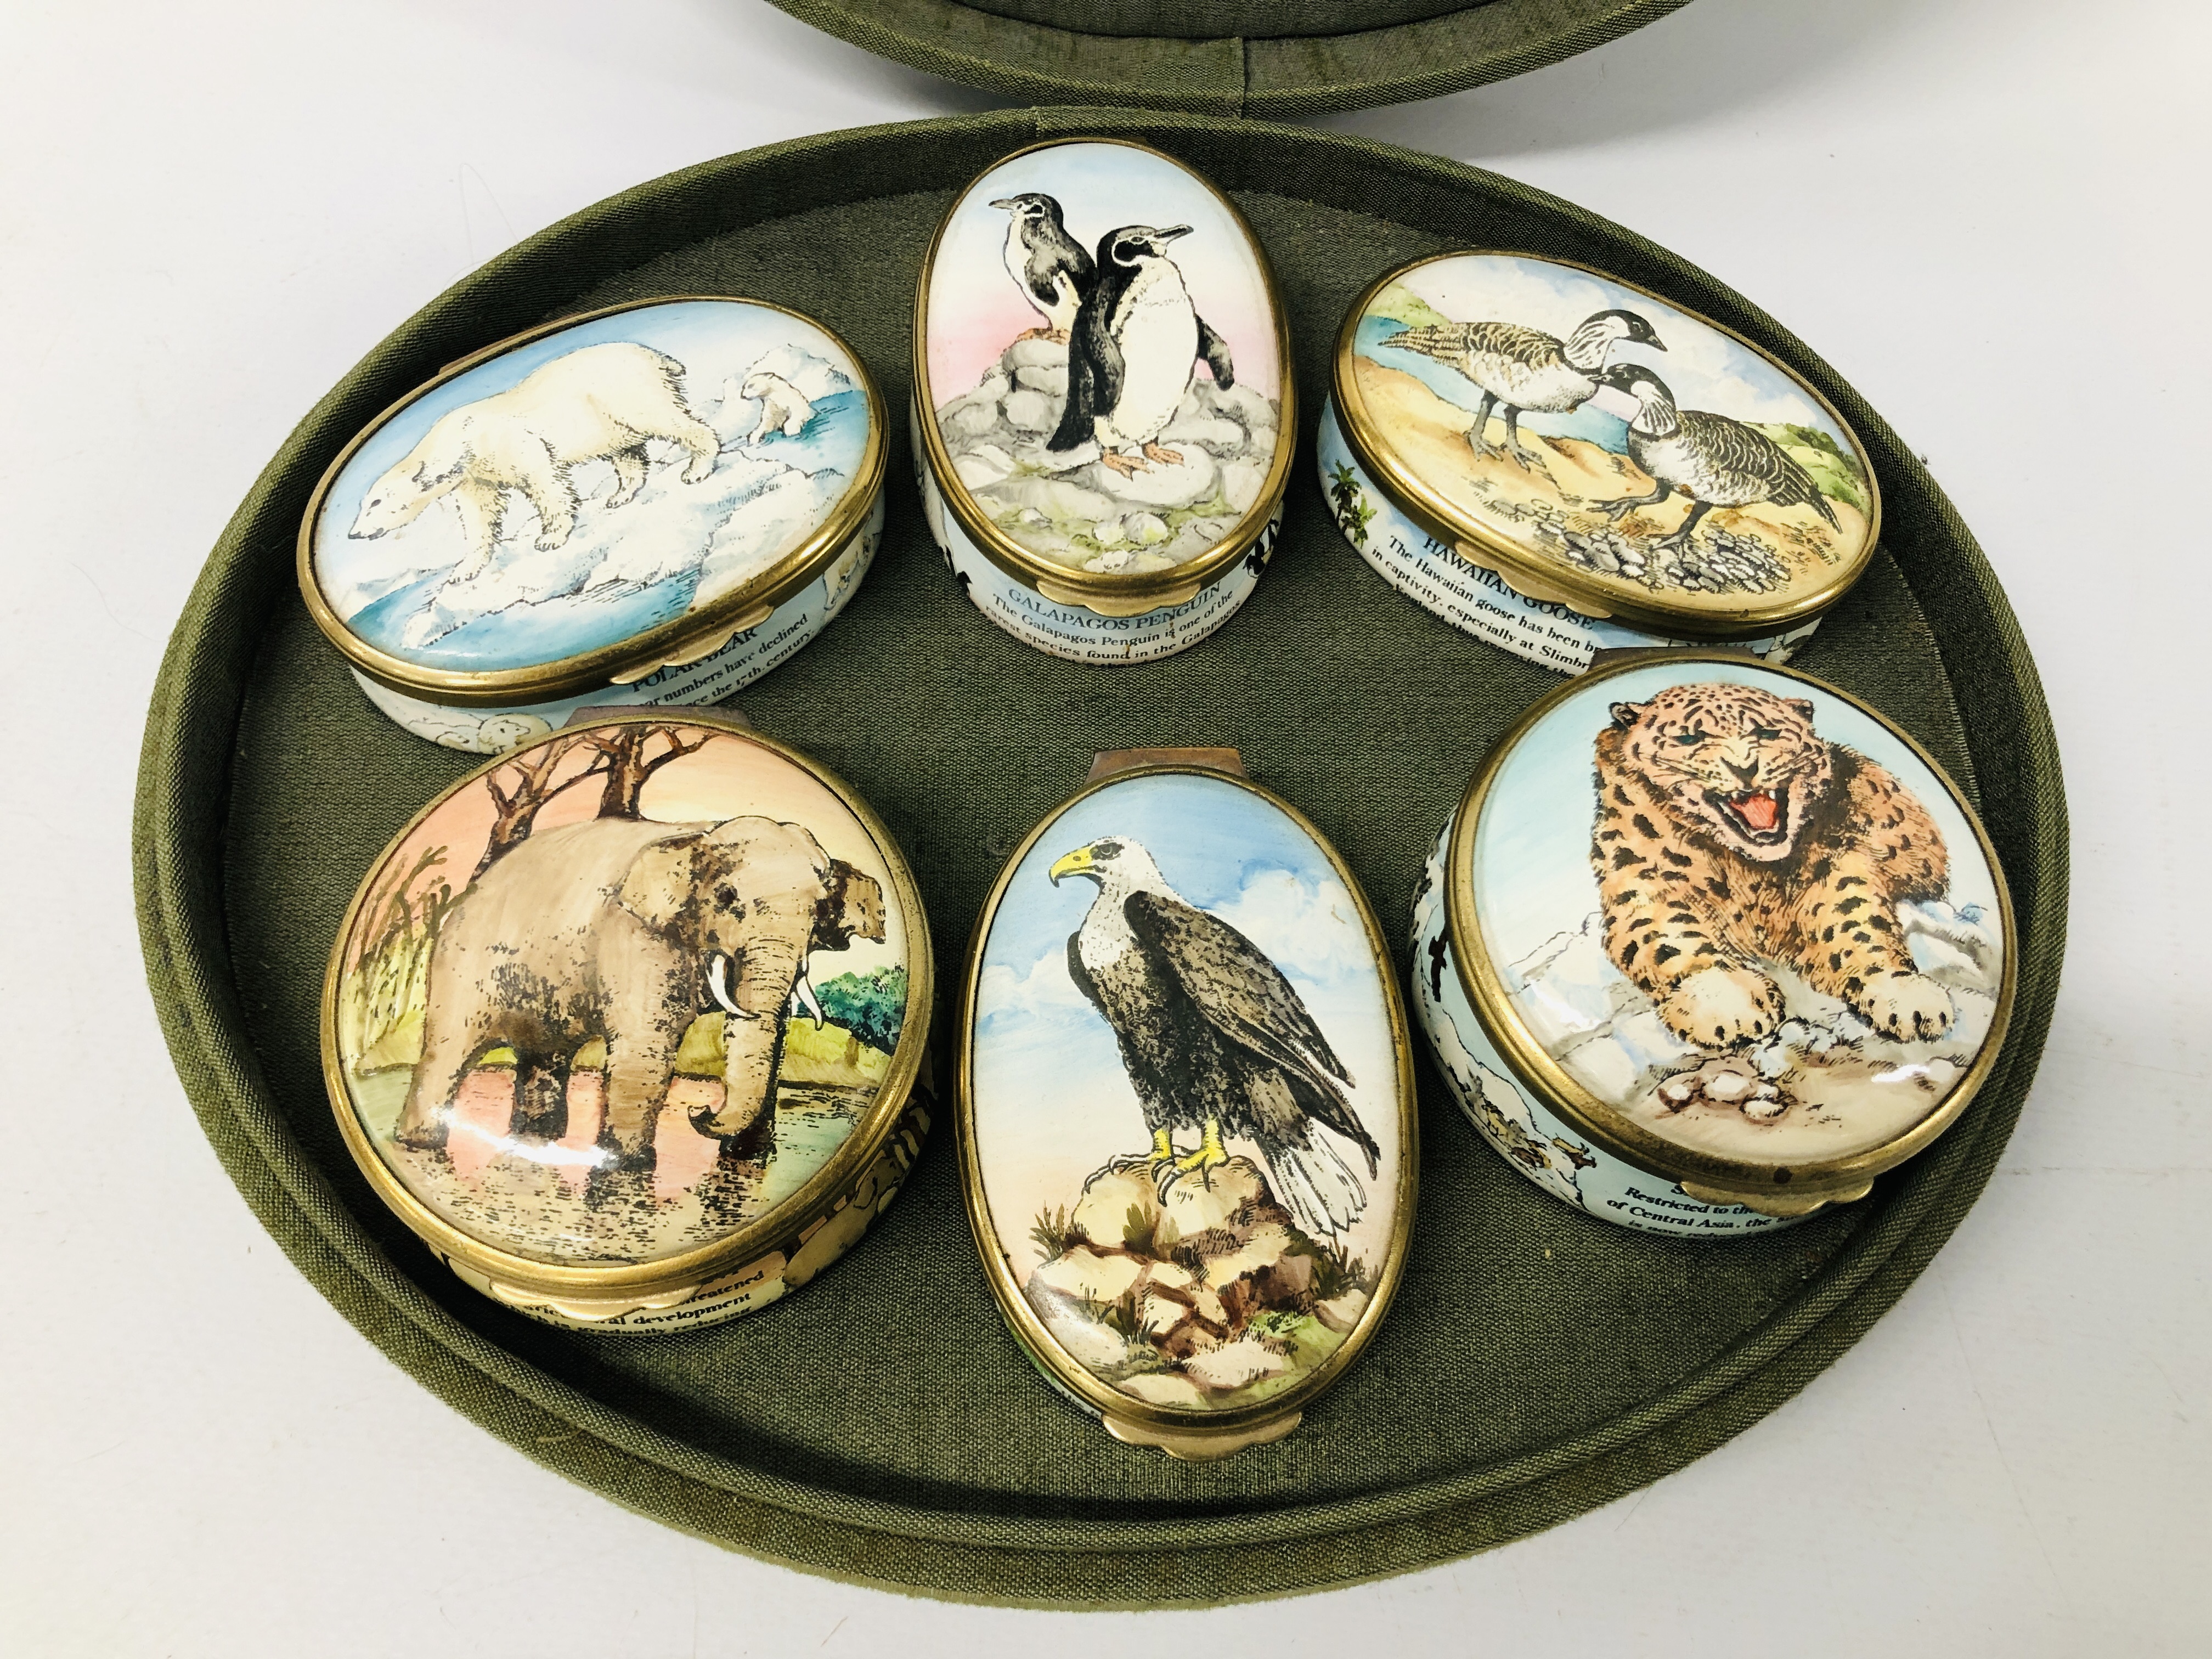 CASED SET OF 6 BILSTON AND BATTERSEA ENAMELS "WORLD WILDLIFE COLLECTION" LIMITED EDITION 106/350 - Image 2 of 5